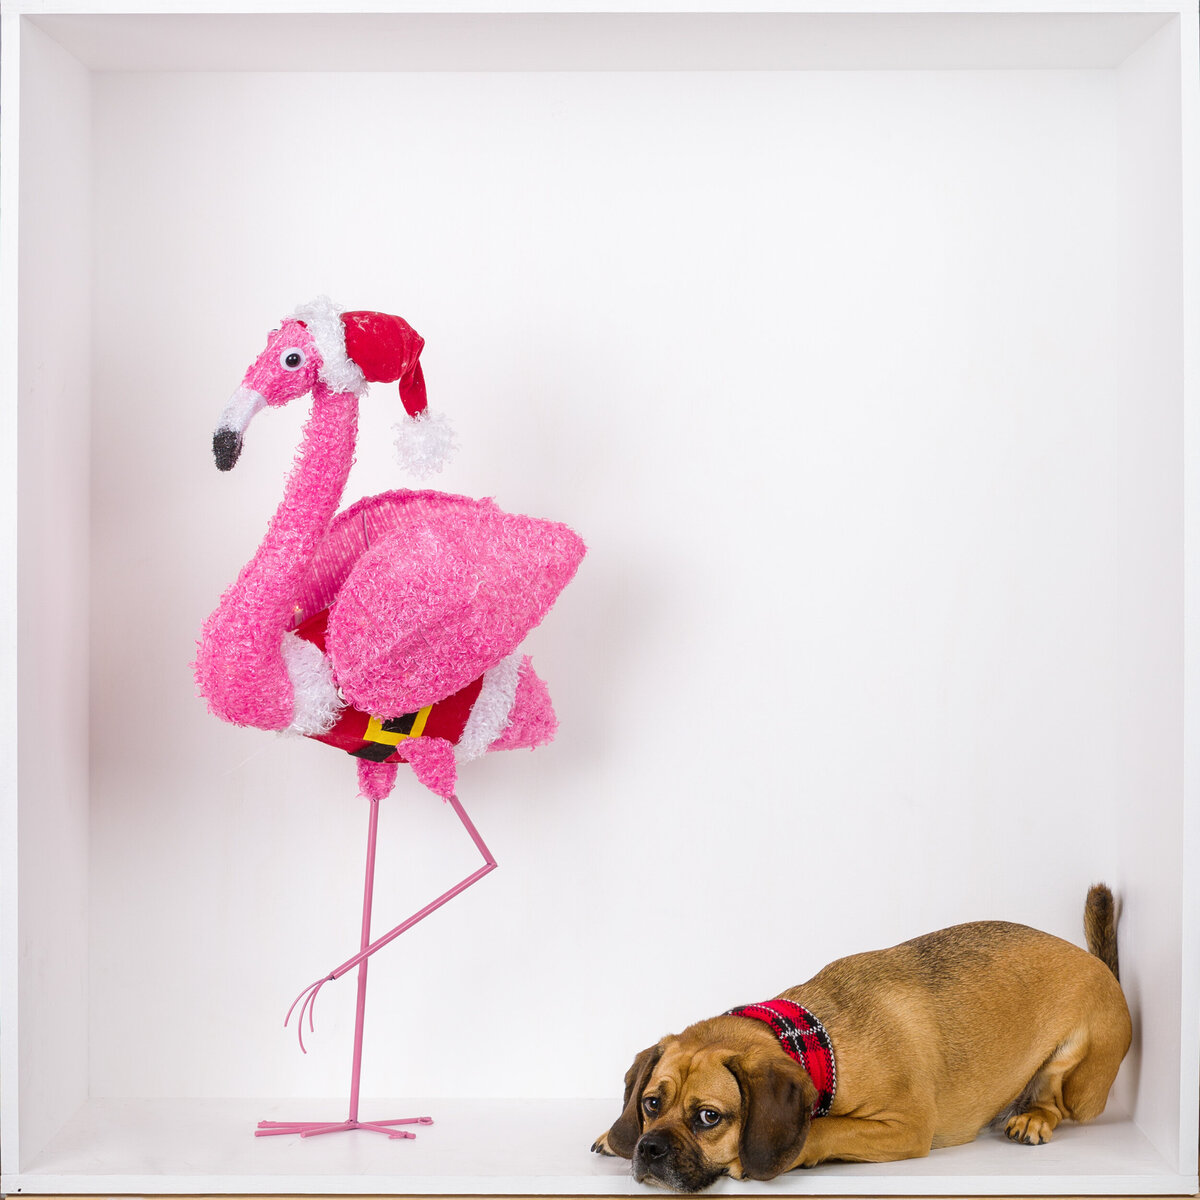 A dog and flamingo wearing a Santa hat in a white box